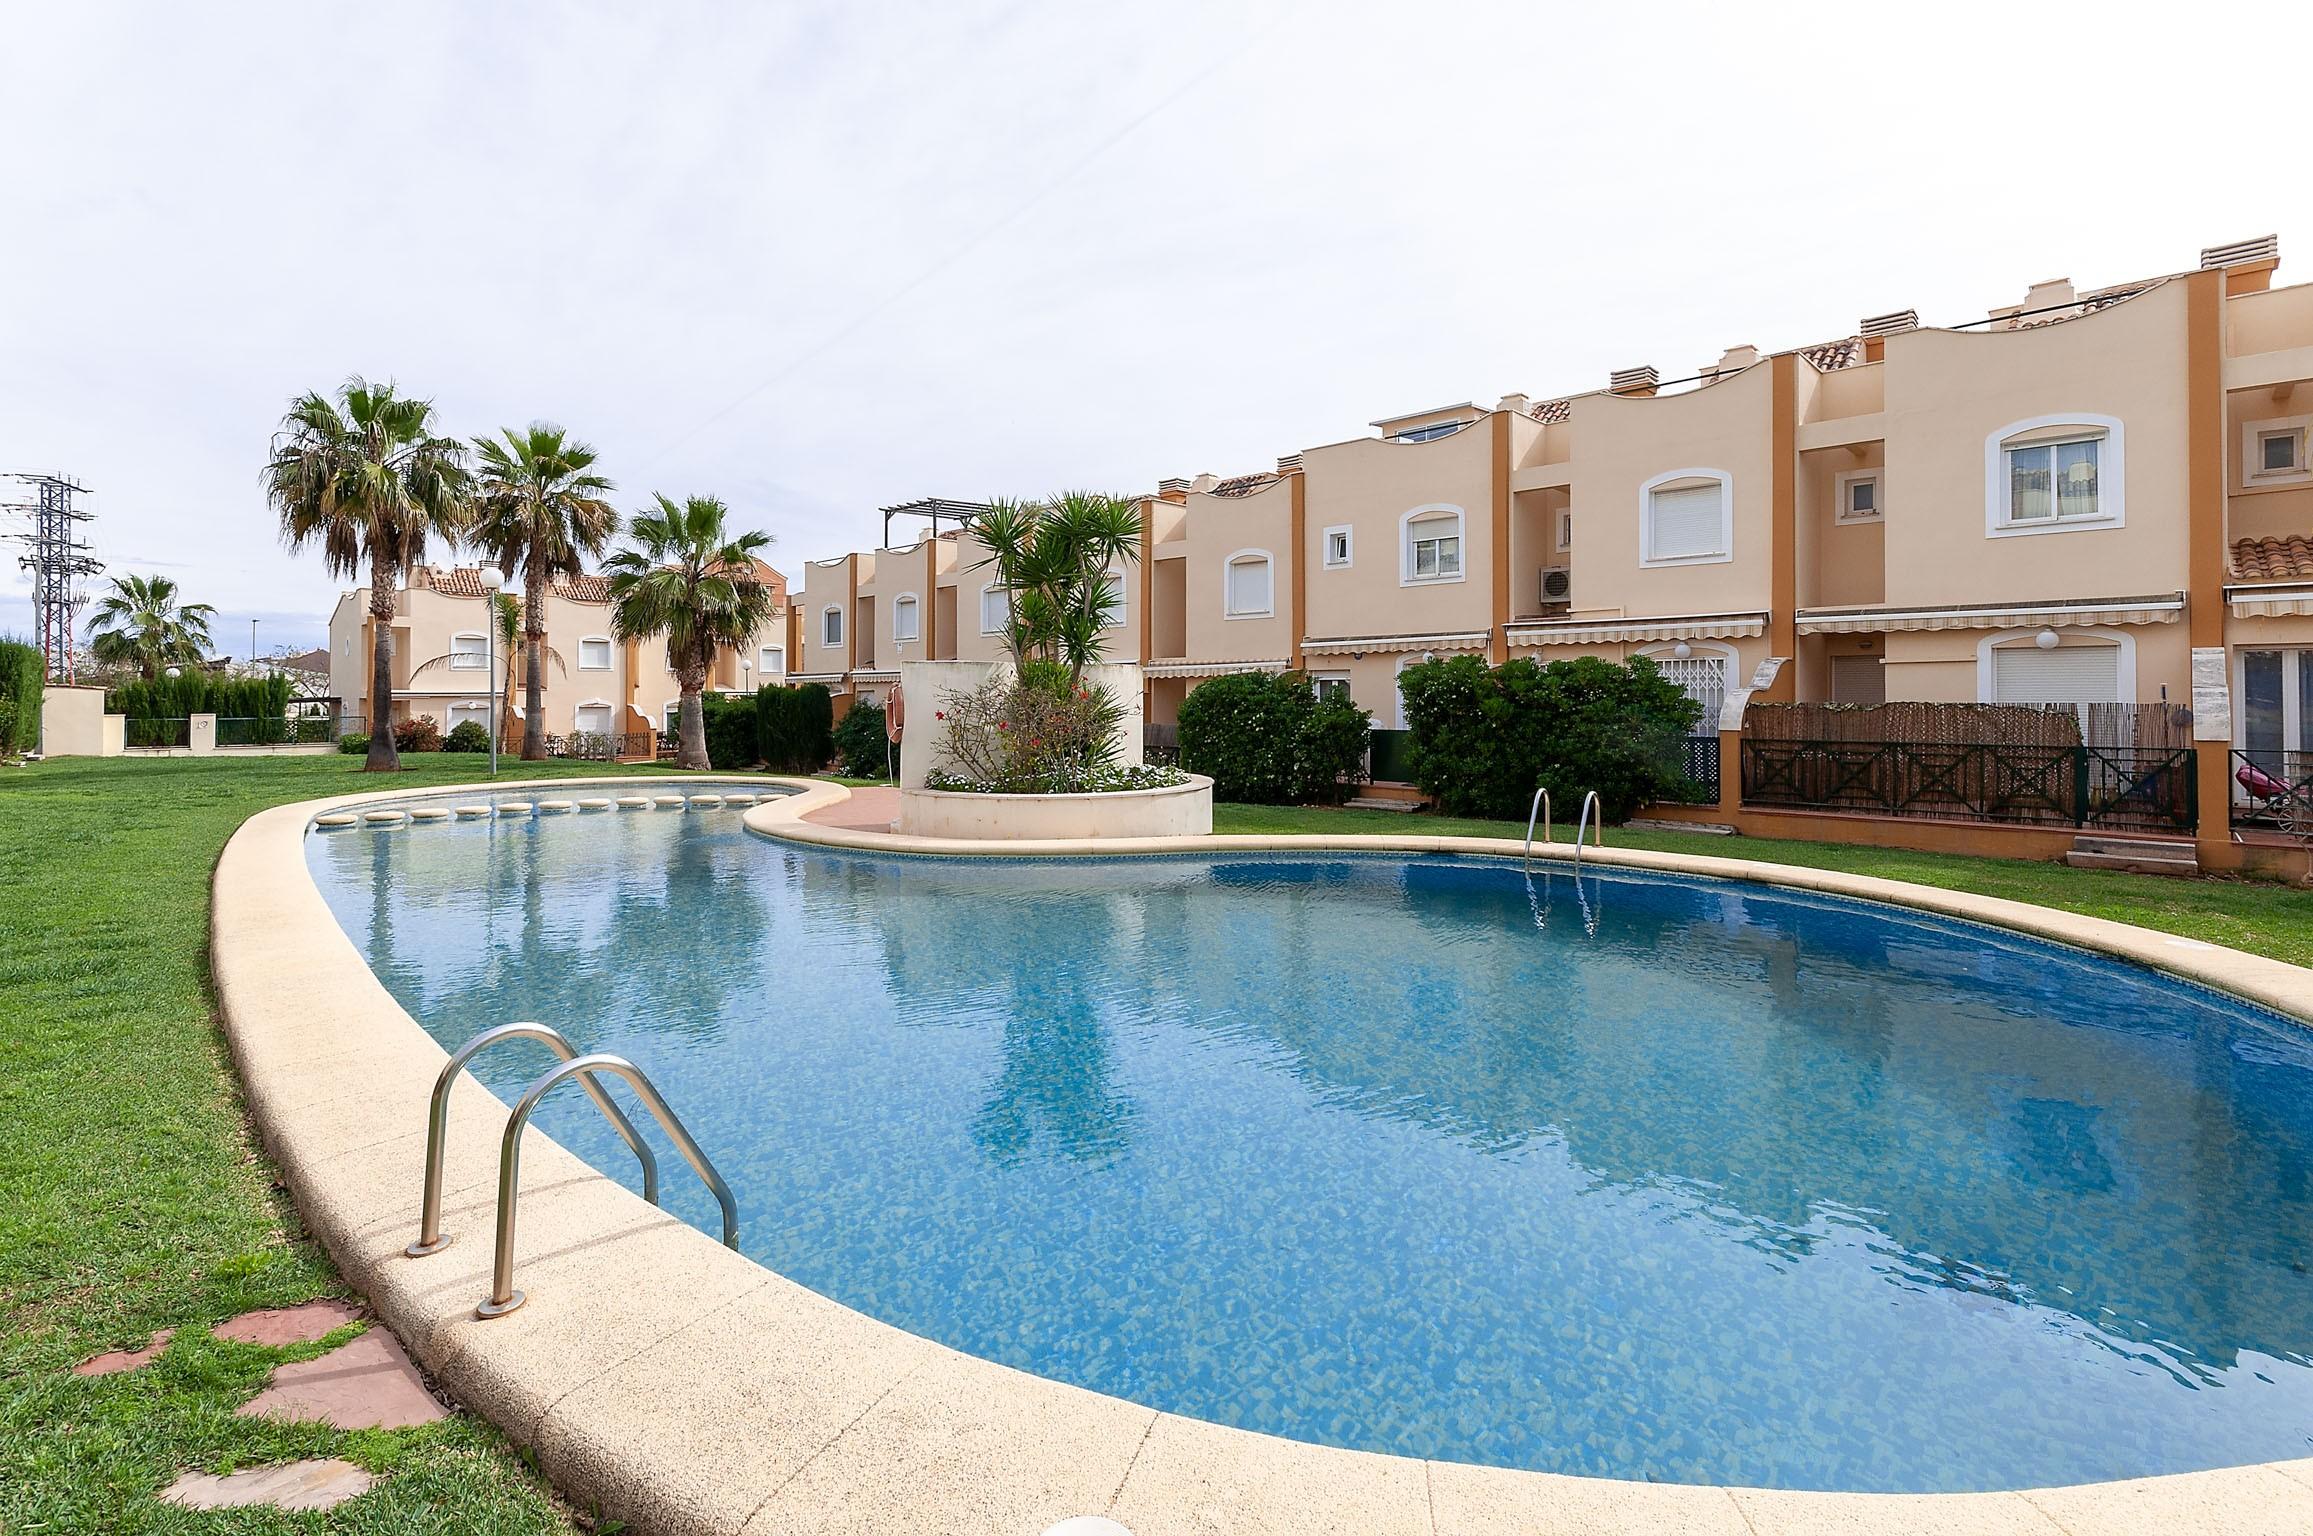 Property Image 1 - VILLAS DEL MONTGÓ - Fantastic apartment with shared pool and only 2 km from the sea in Denia. Free WiFi